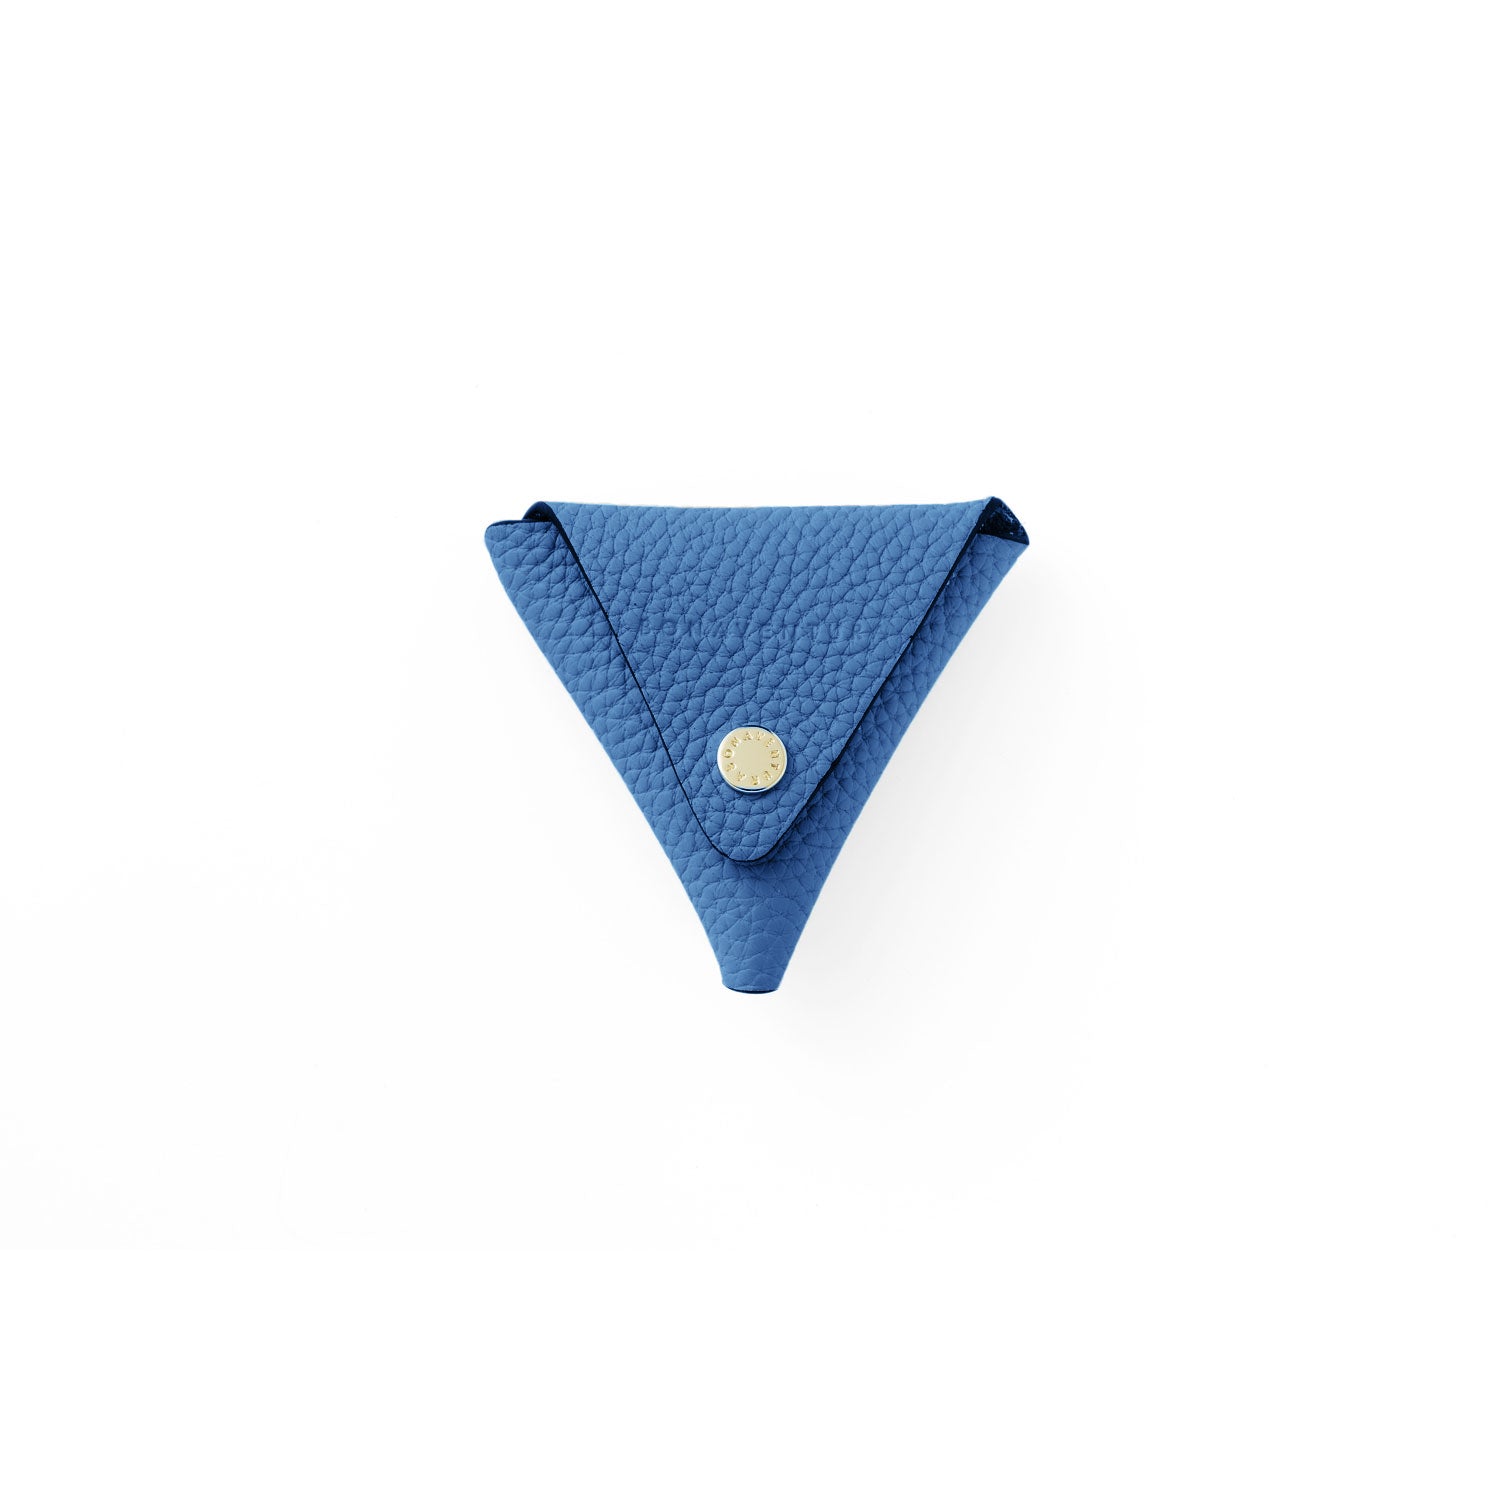 SAVOIA × BONAVENTURA Triangle Coin Case in Shrink Leather